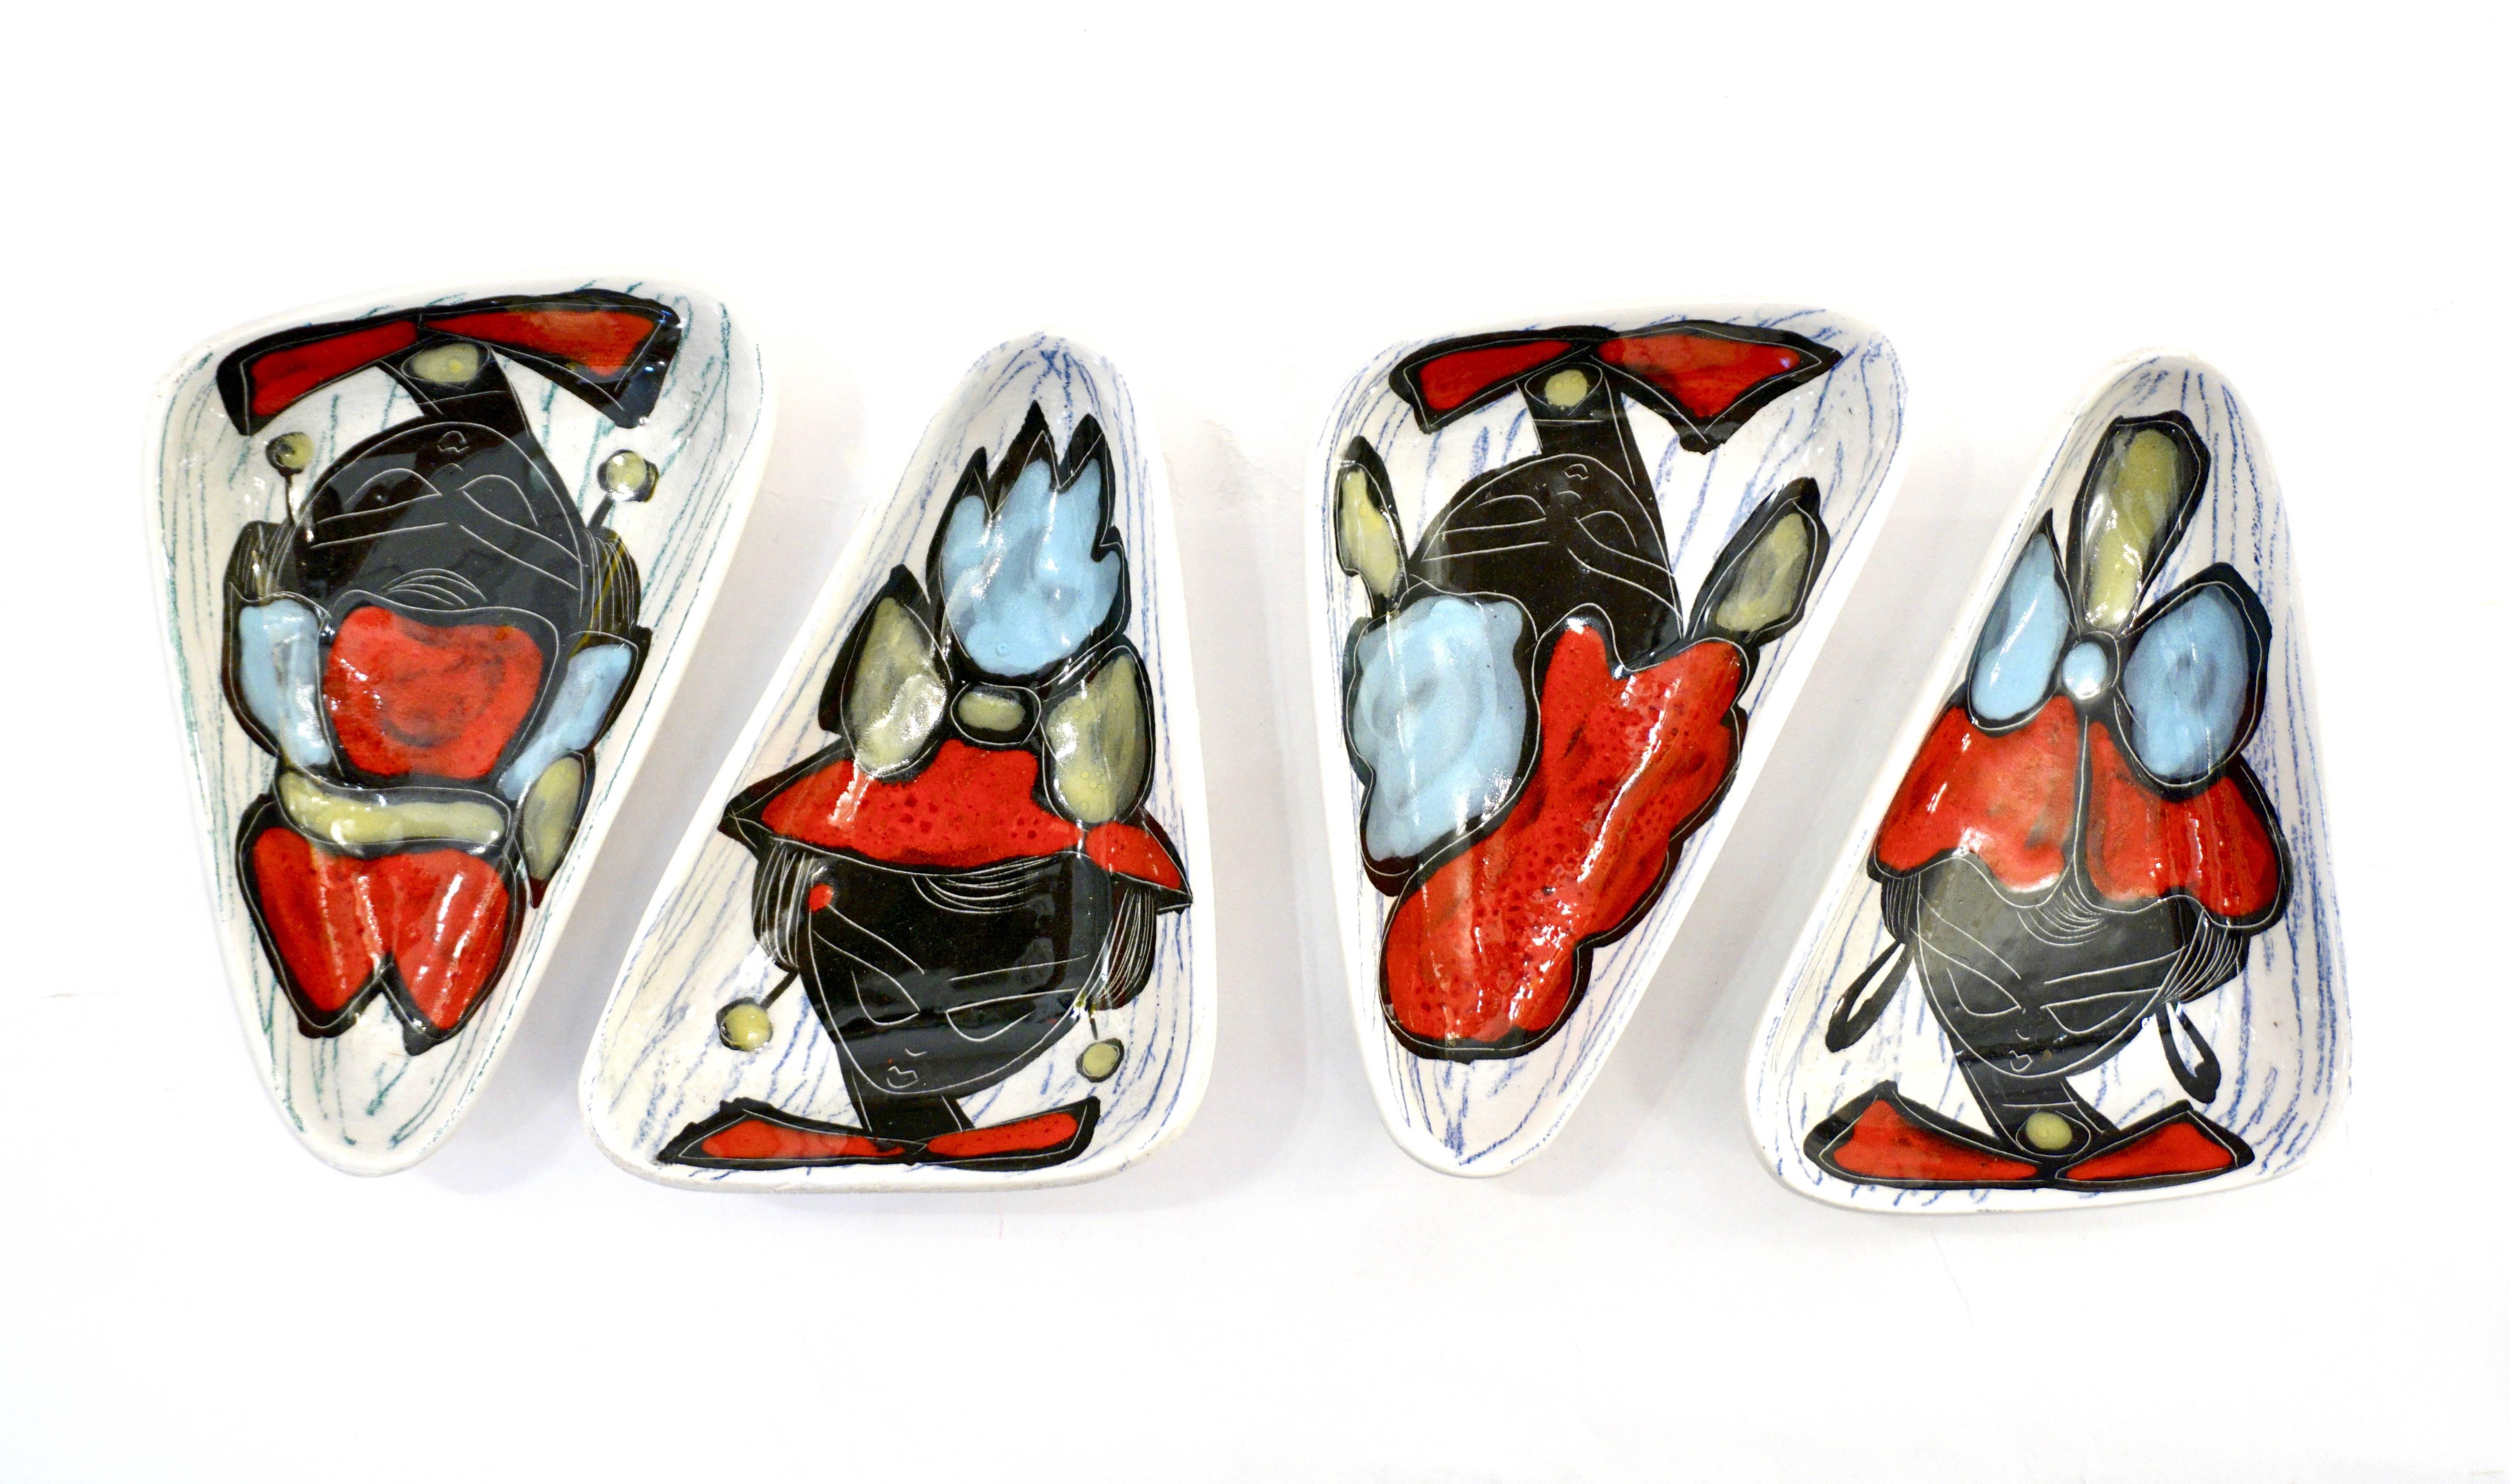 Price is per item, rare set of six 1950s Italian Porcelain decorative dishes by a Ceramic Studio in Ravenna, each individually handcrafted in different attractive organic geometric shapes, oval, triangular, rectangular and tear-drop shape. Each hand